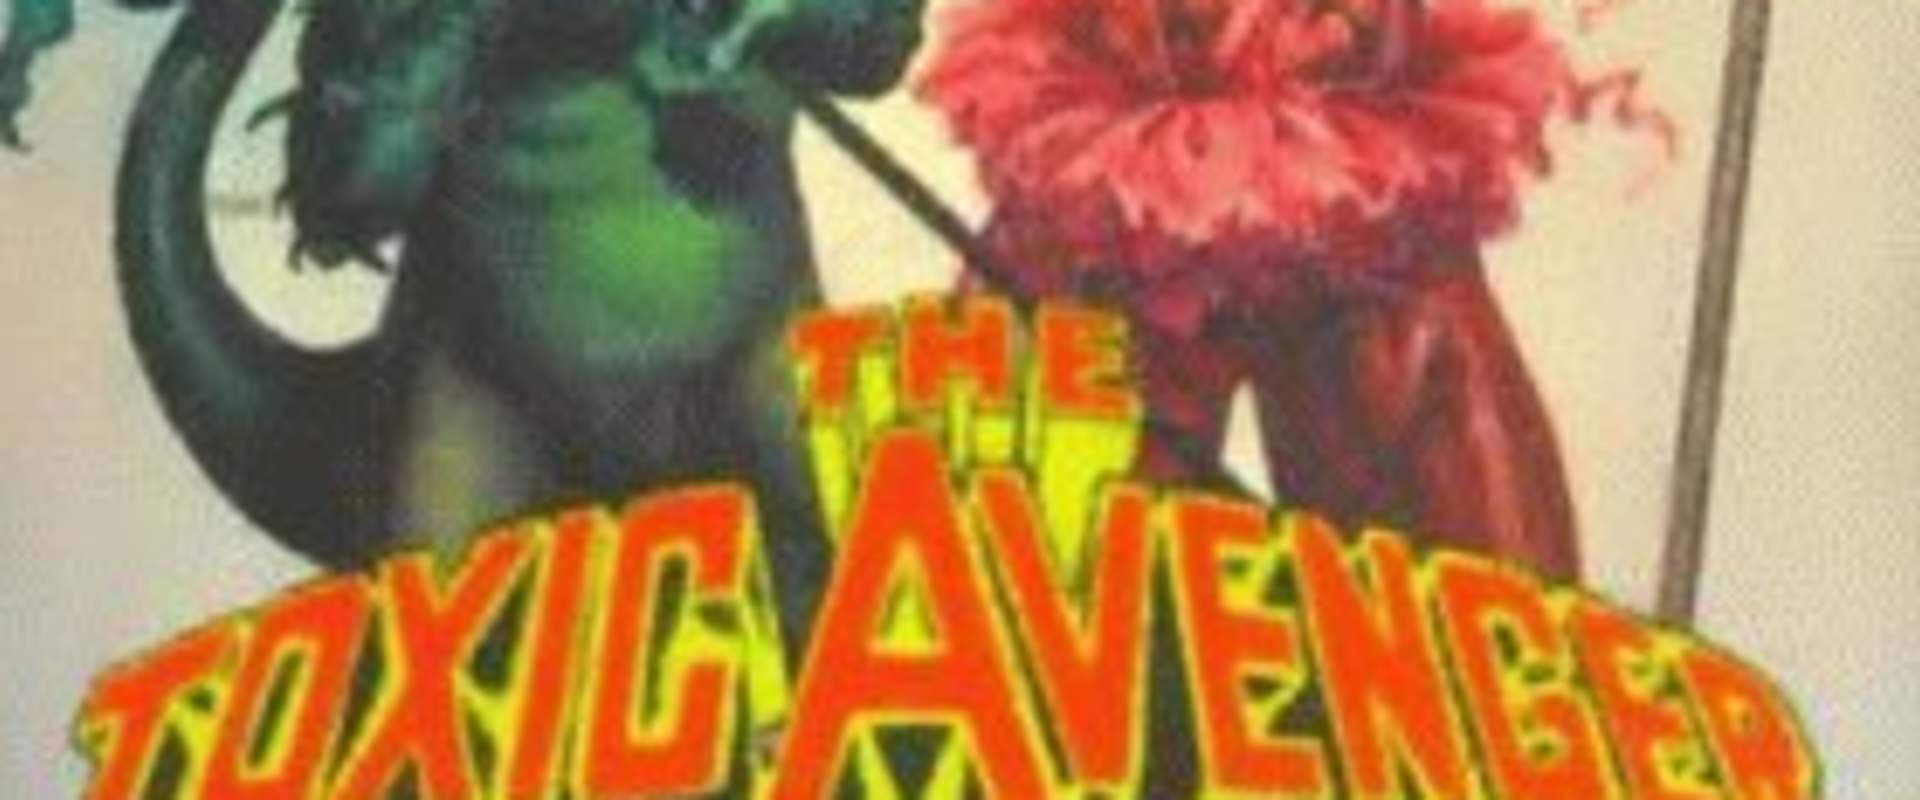 The Toxic Avenger Part III: The Last Temptation of Toxie background 2